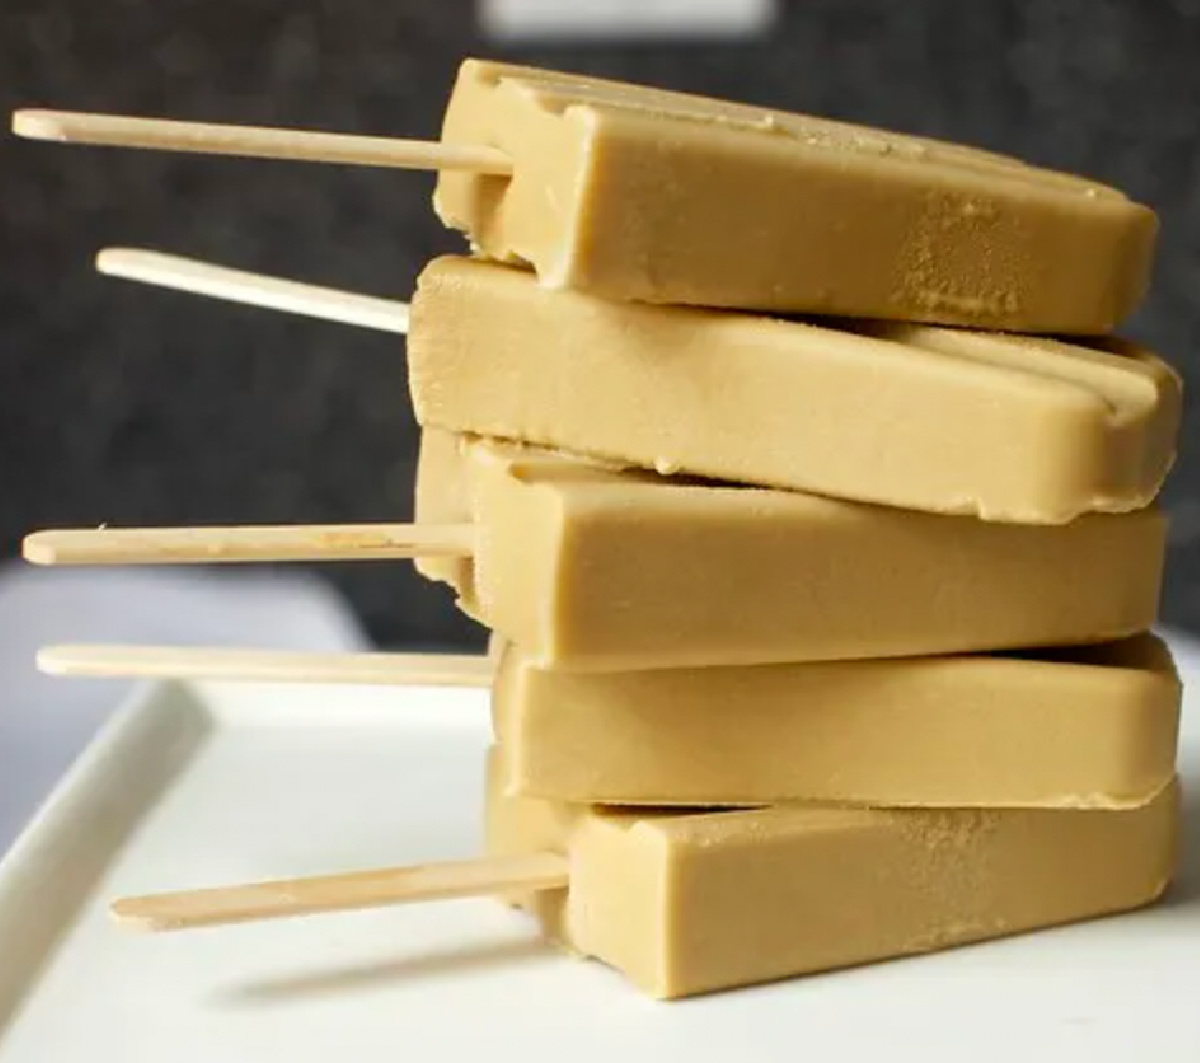 butterscotch pudding pops stacked